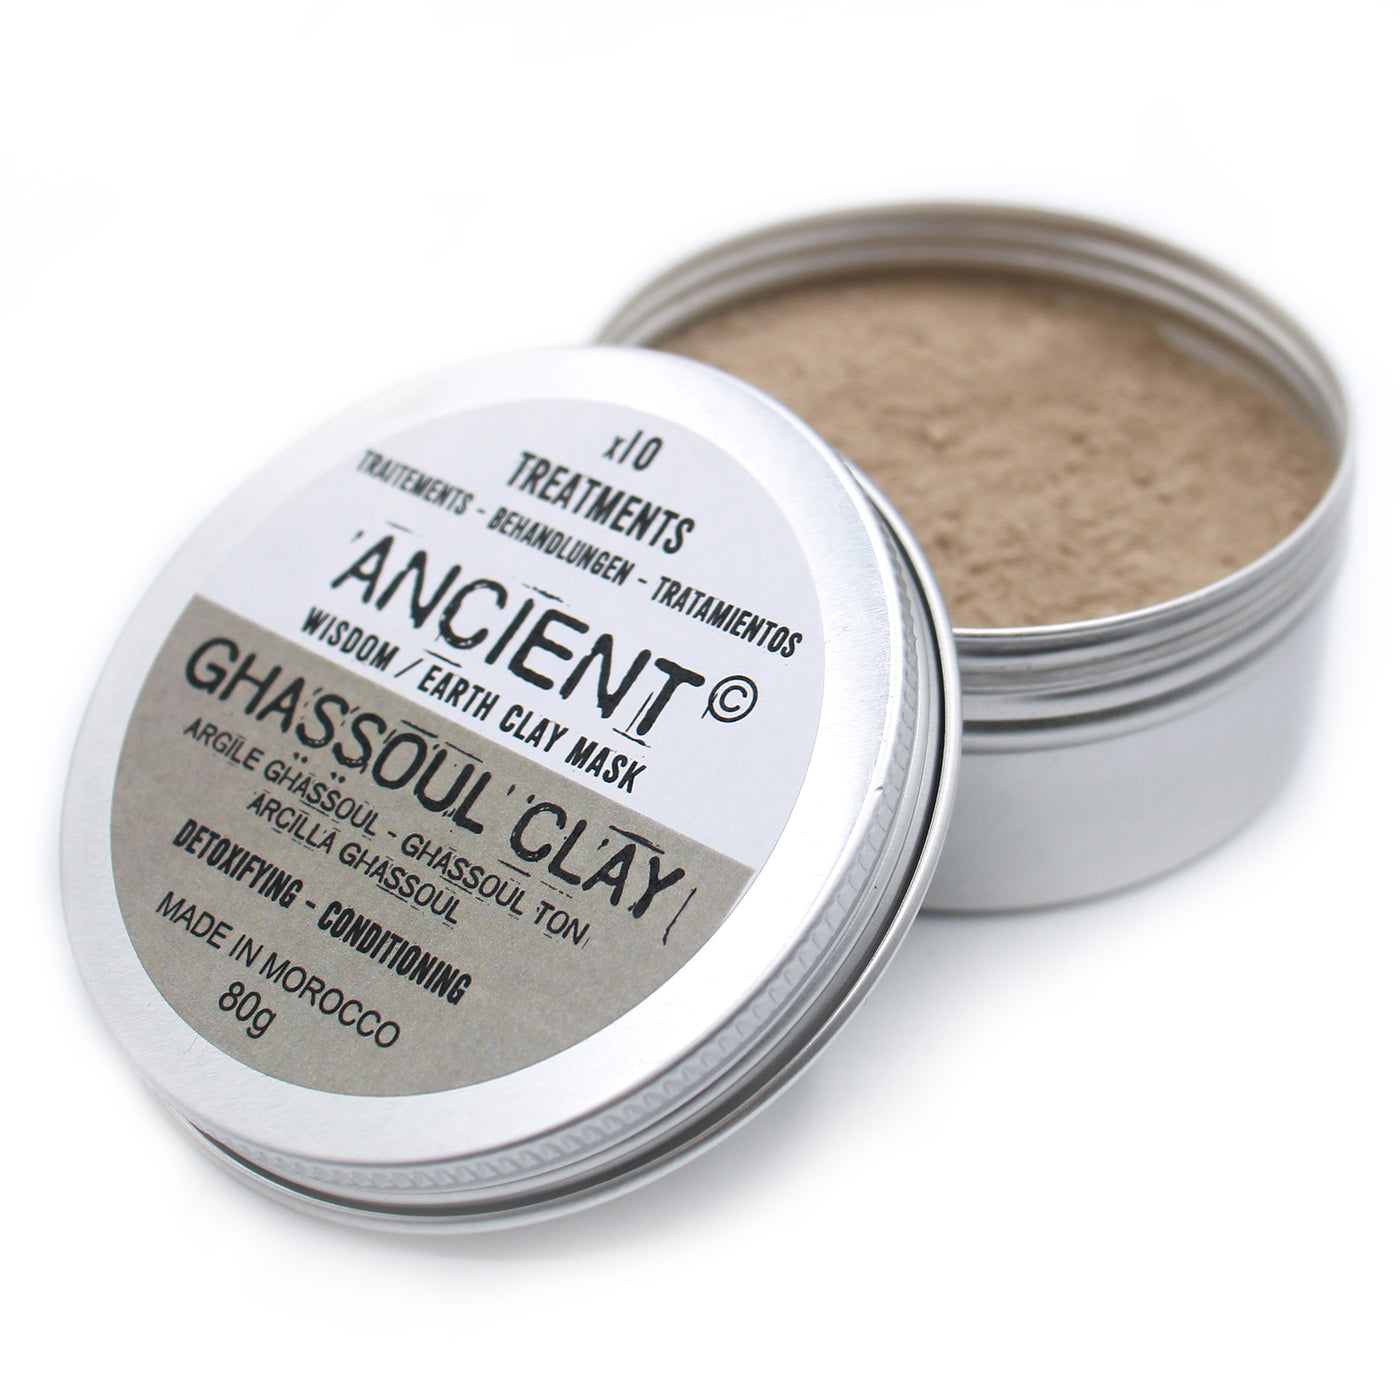 Ghassoul Detoxifying & Conditioning Clay Face Mask - 80g.